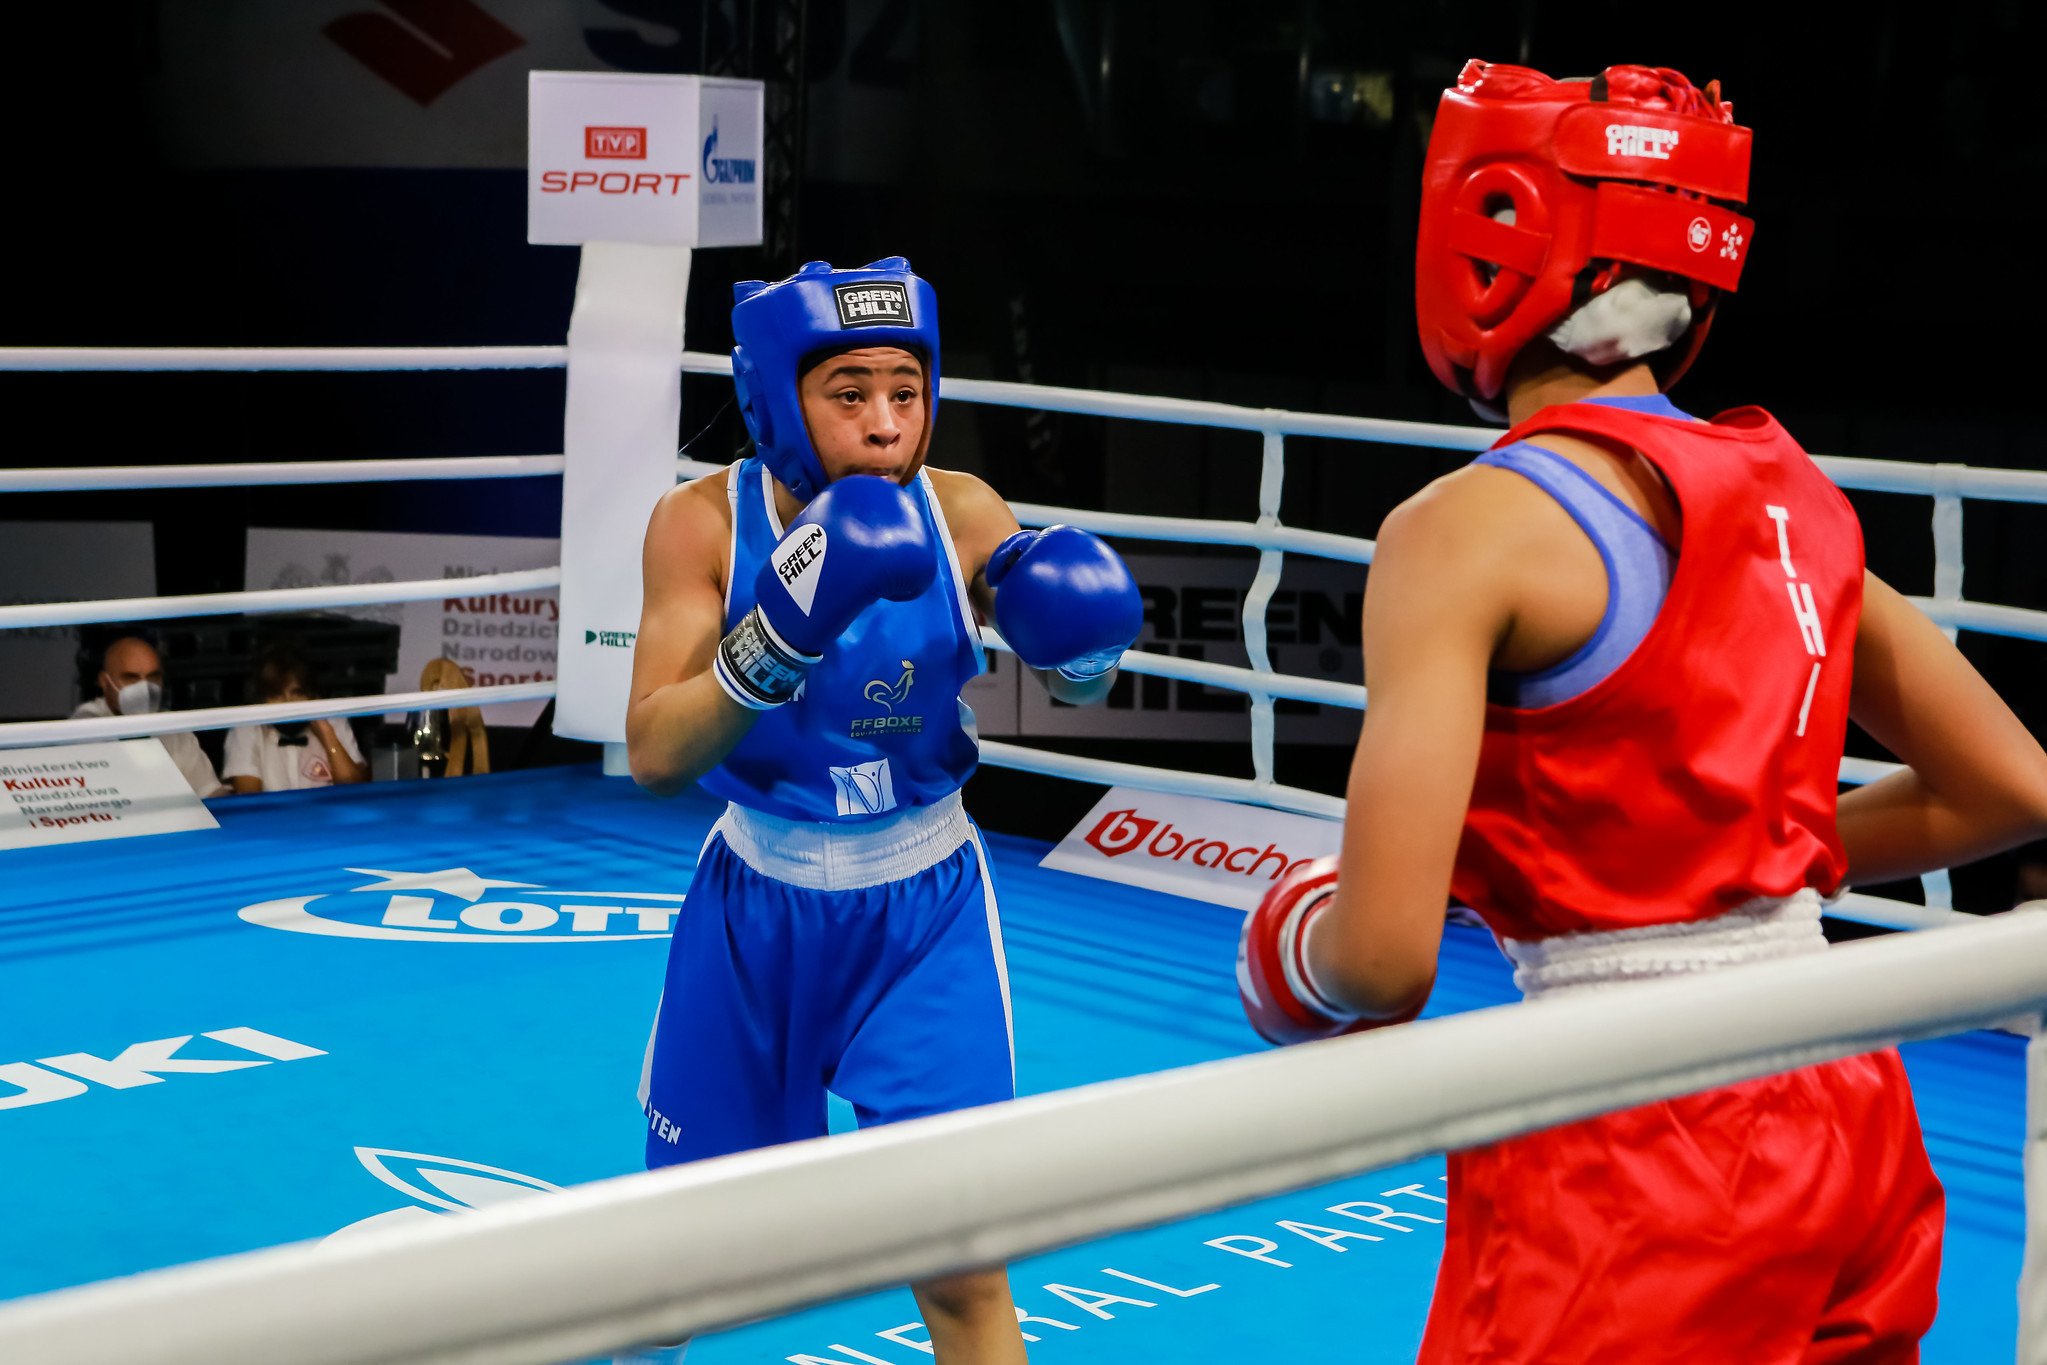 France's Sthelyne Grosy, in blue, reached the women's featherweight final in convincing fashion ©AIBA